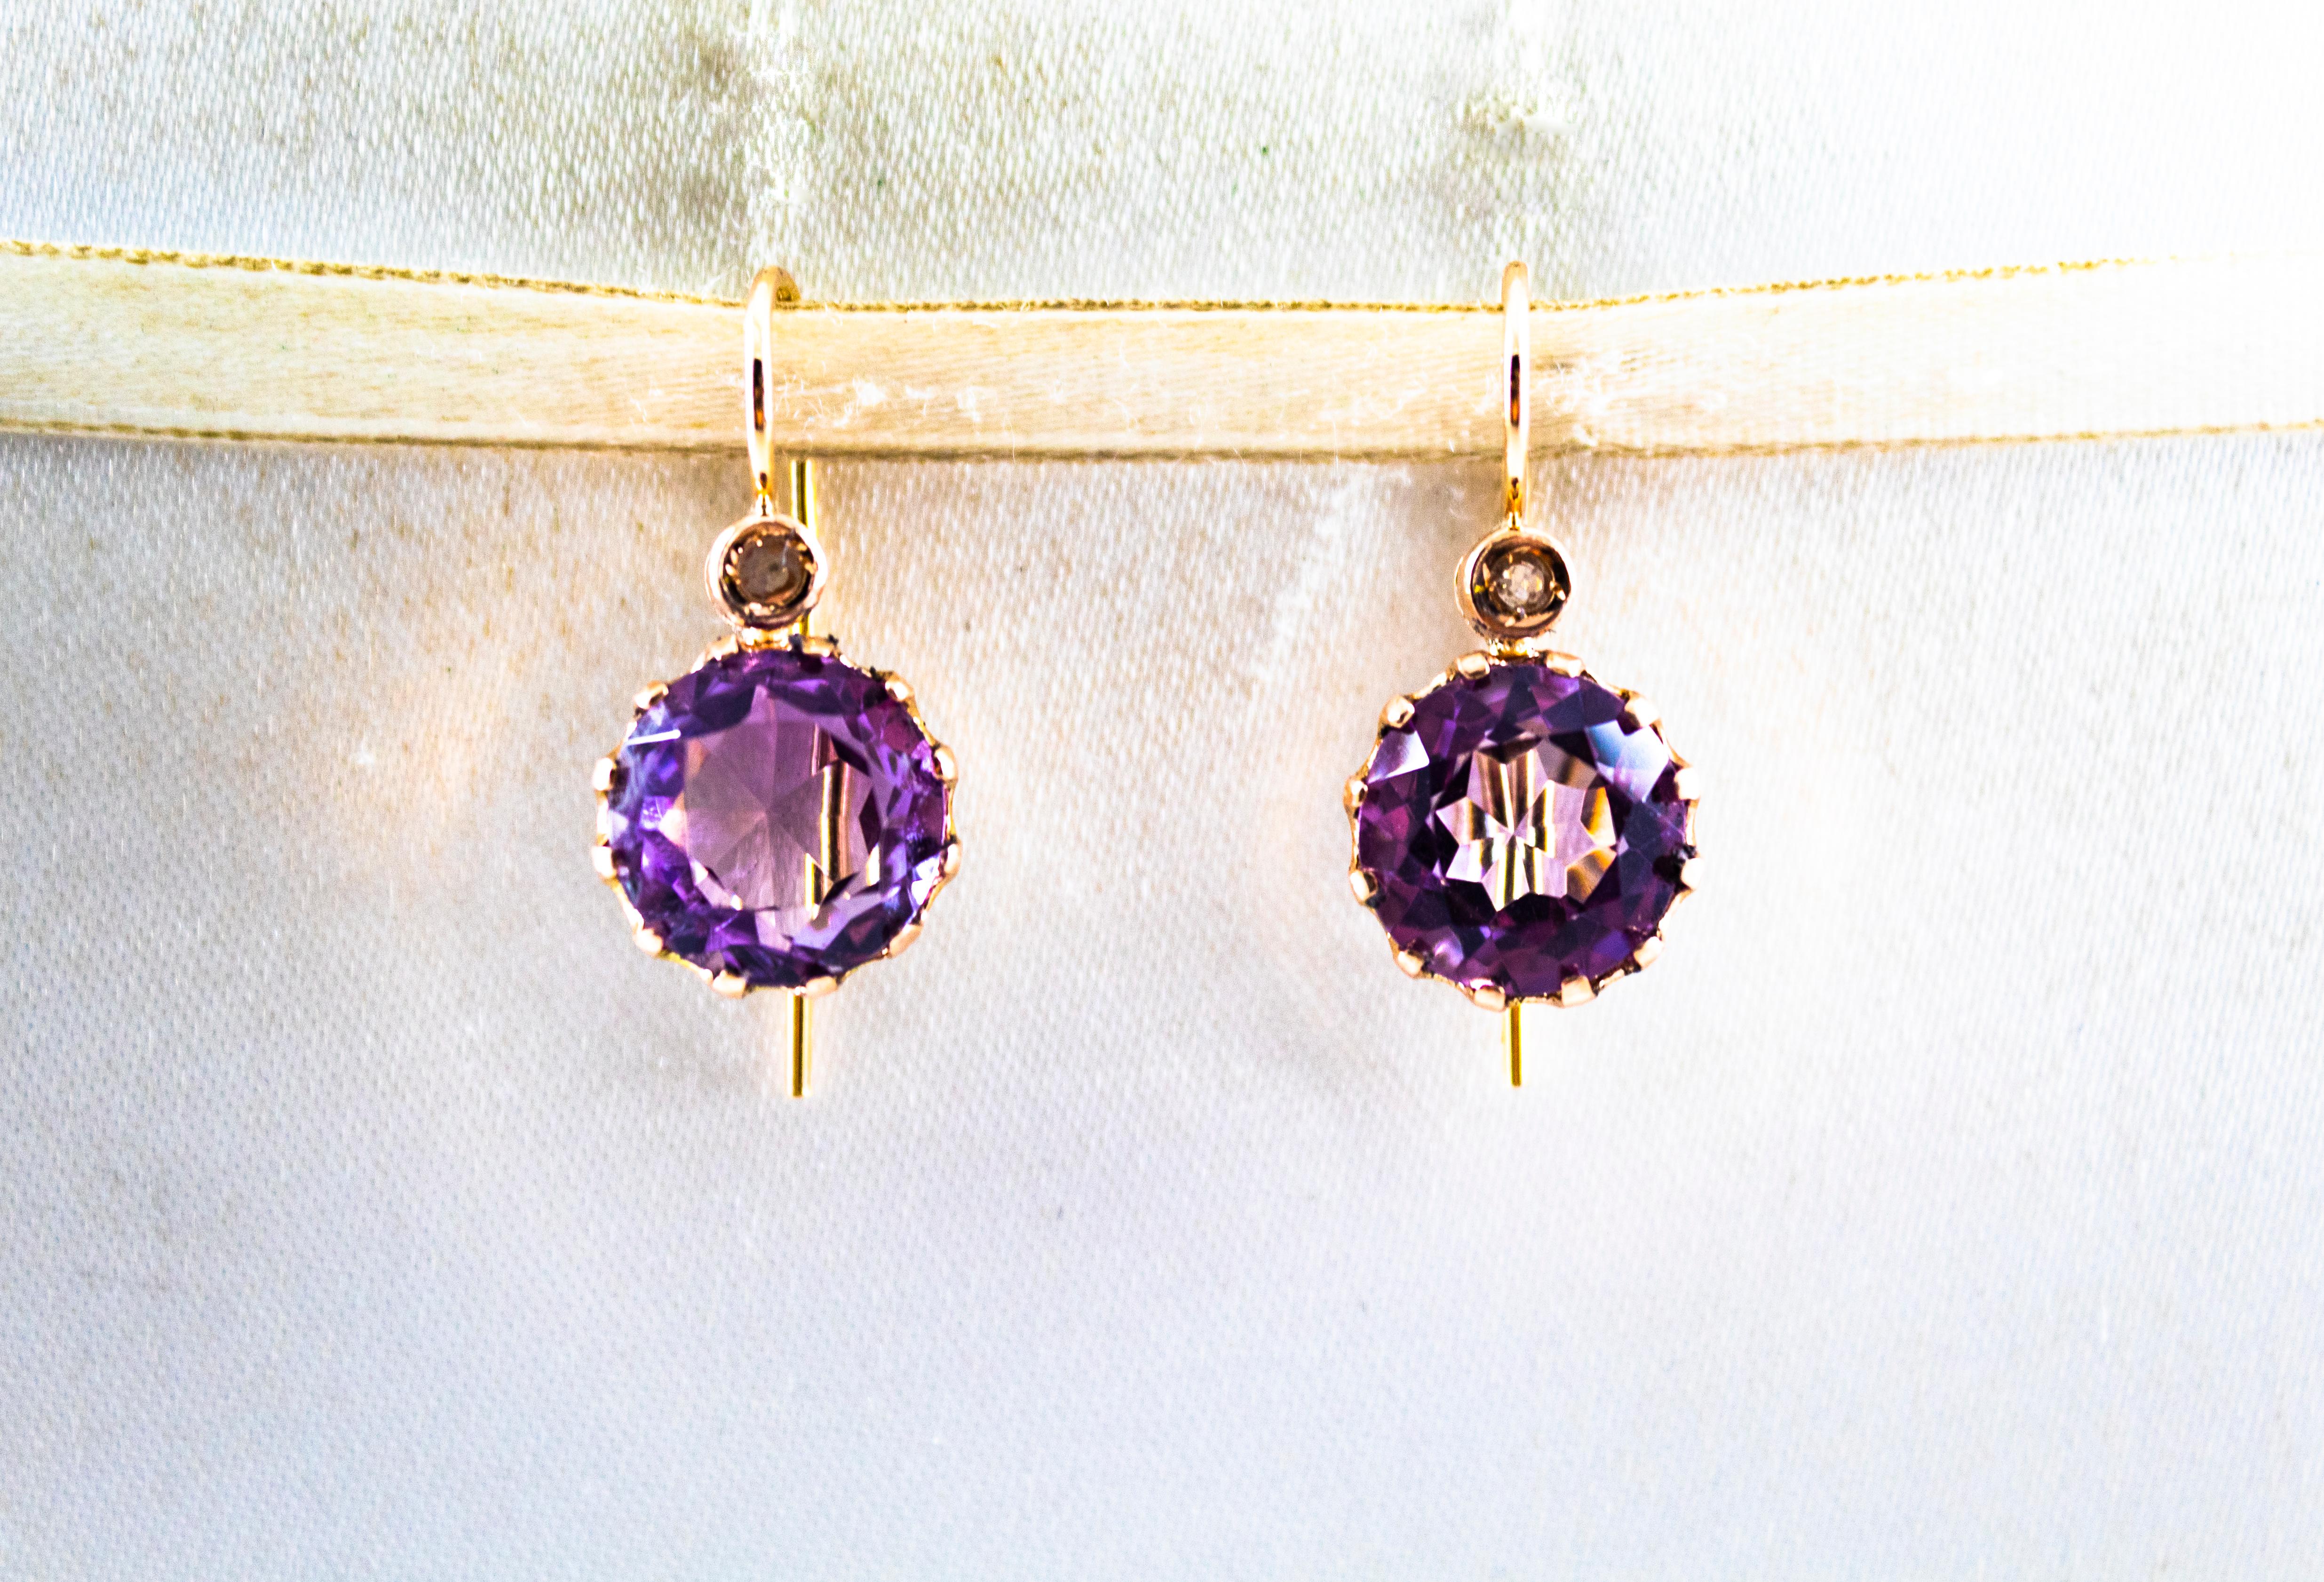 These Earrings are made of 9K Yellow Gold.
These Earrings have 0.10 Carats of White Rose Cut Diamonds.
These Earrings have 9.00 Carats of Amethysts.
These Earrings are available also in White Gold.
These Earrings are also available with Male Pearls,